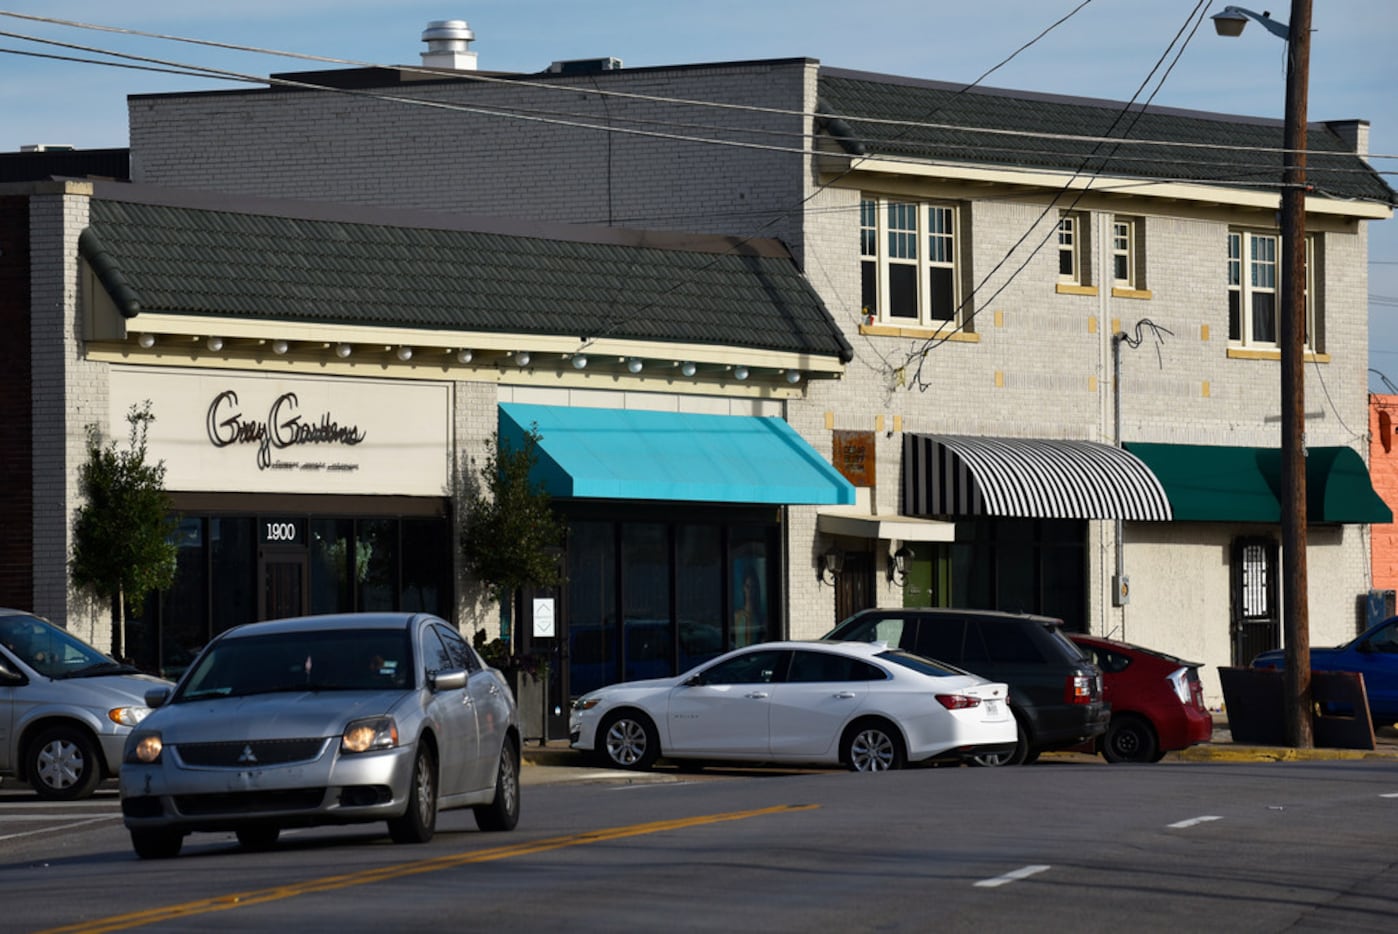 Restaurateur Shannon Wynne restored and reopened this long-shuttered block of South Harwood...